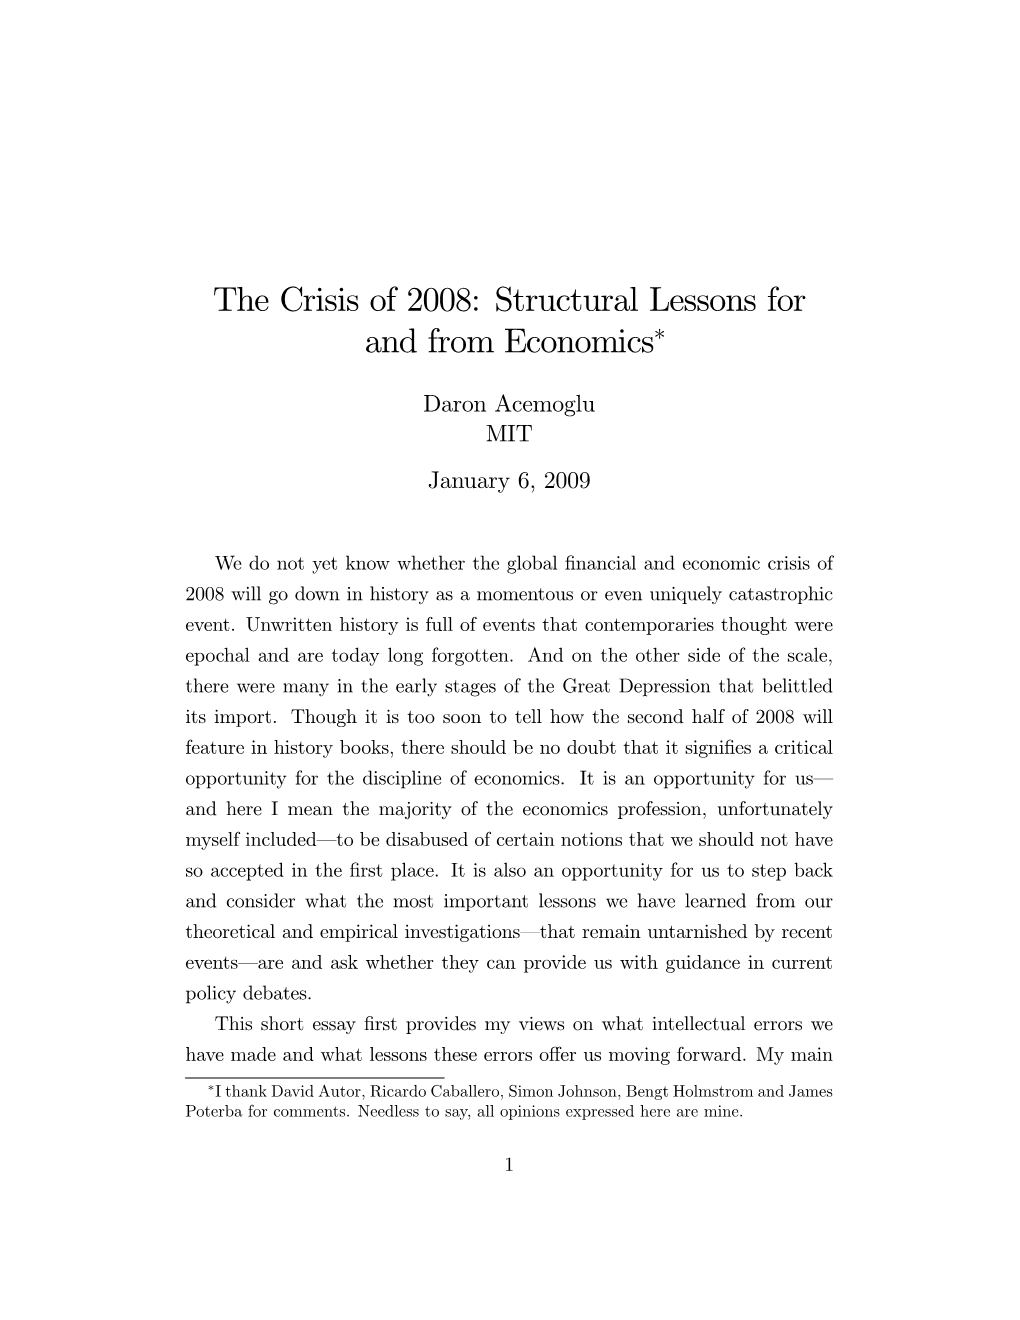 The Crisis of 2008: Structural Lessons for and from Economics*